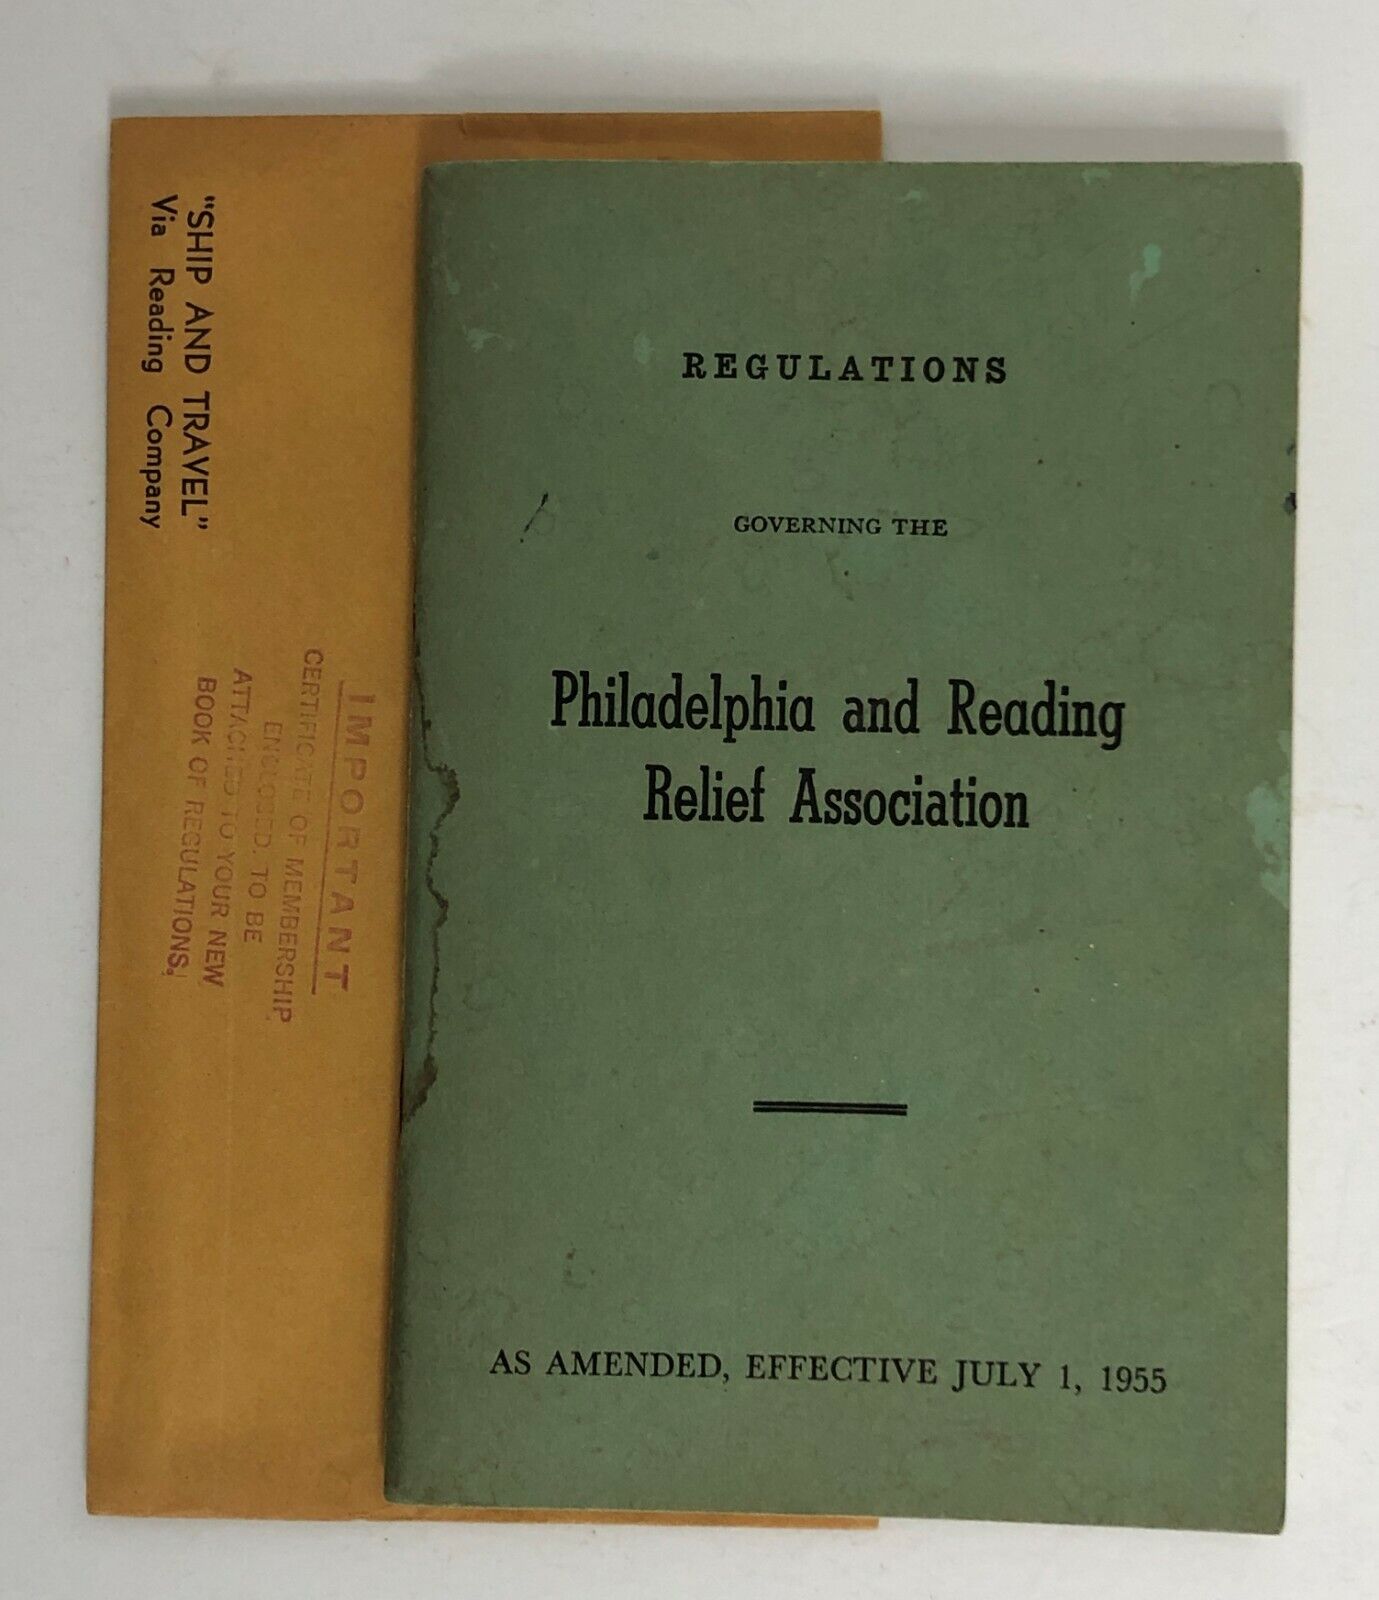 Regulations Governing the Philadelphia and Reading Relief Association 1955